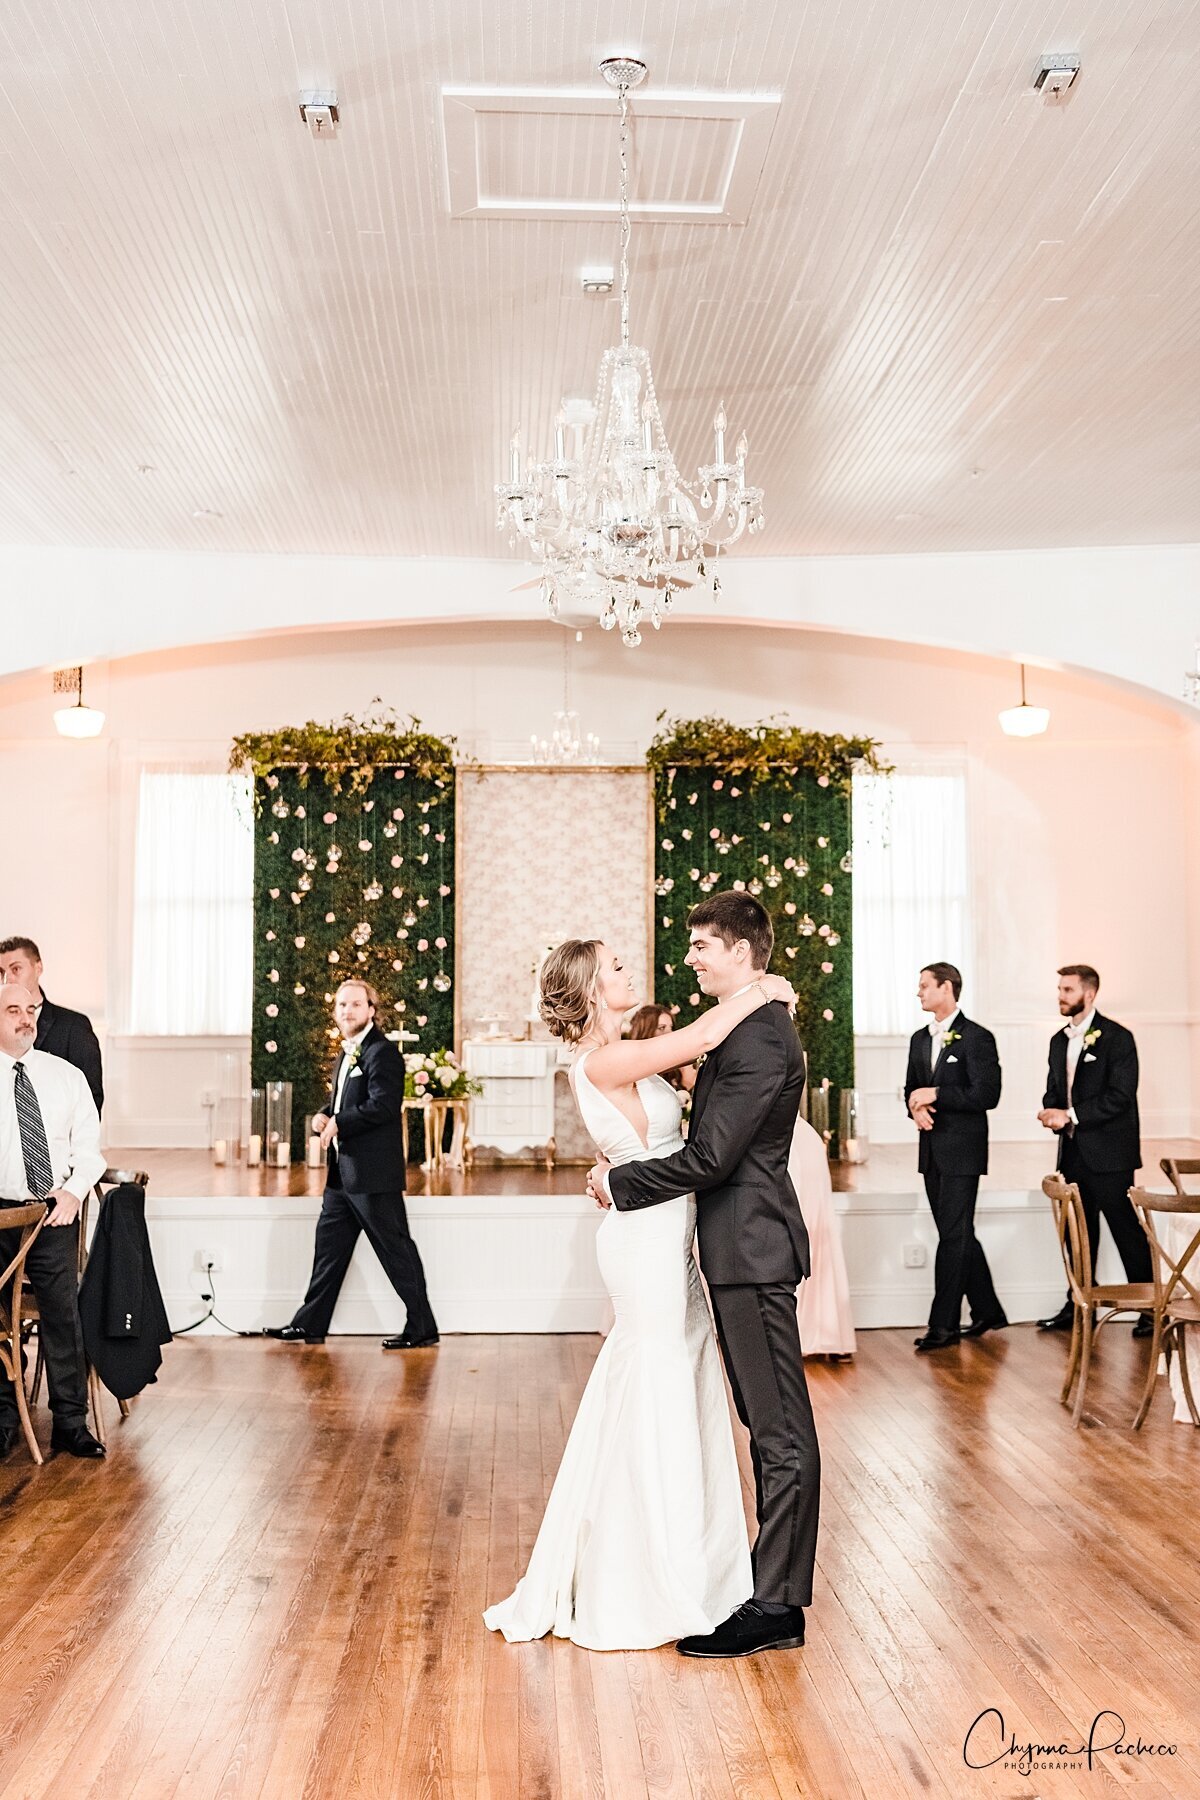 First Dance Bride and Groom | Venue 1902 | Chynna Pacheco Photography-30